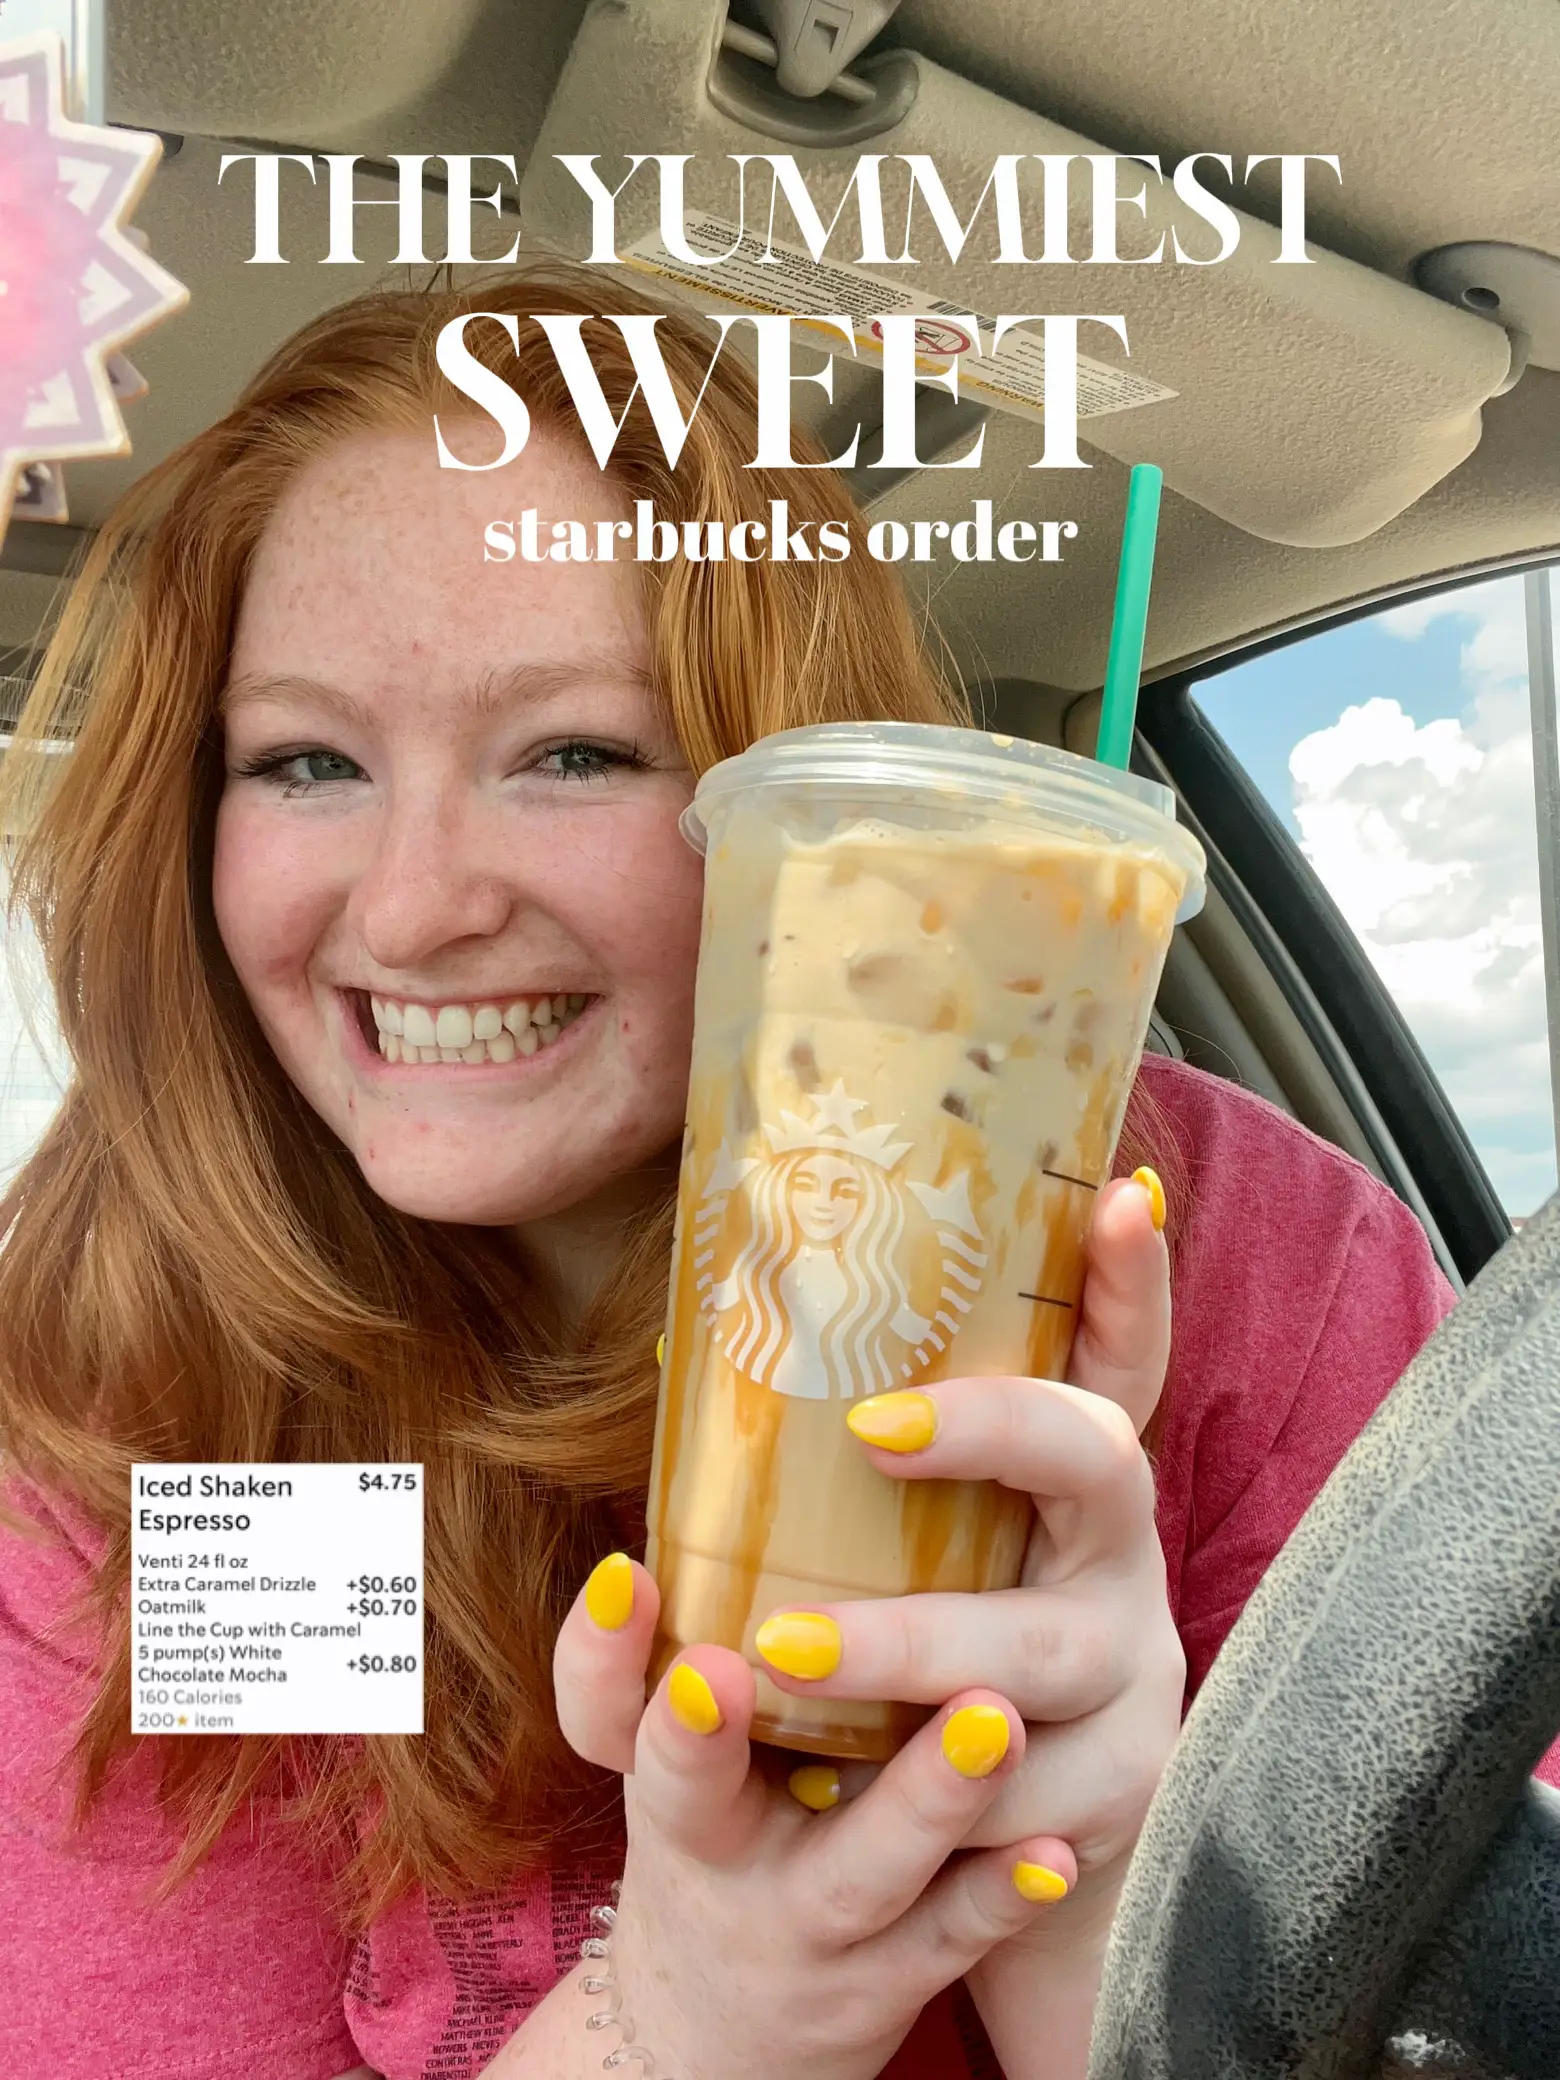 The yummiest starbucks order's images